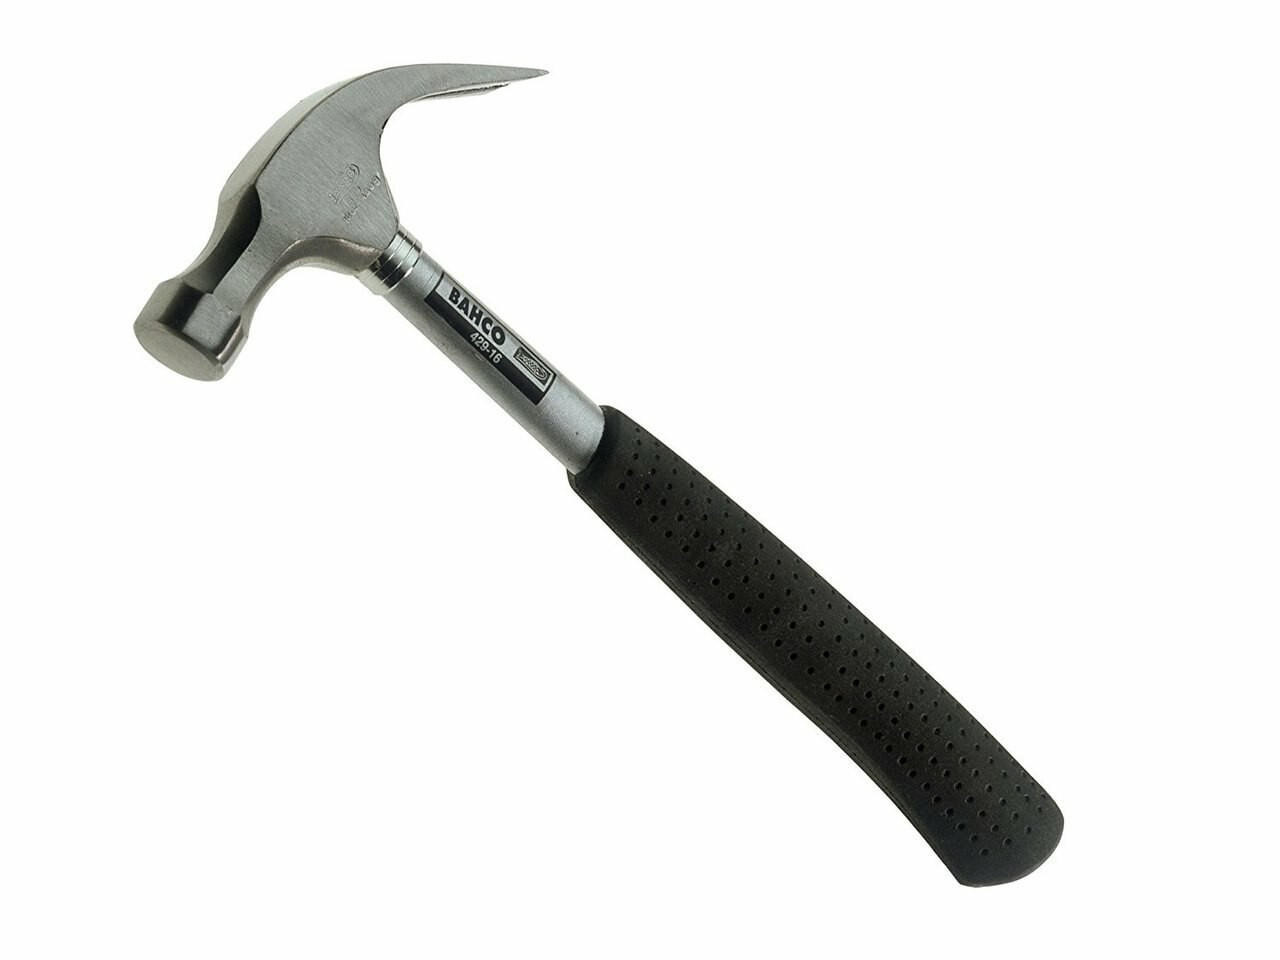  Bahco Claw Hammer - 429-16 